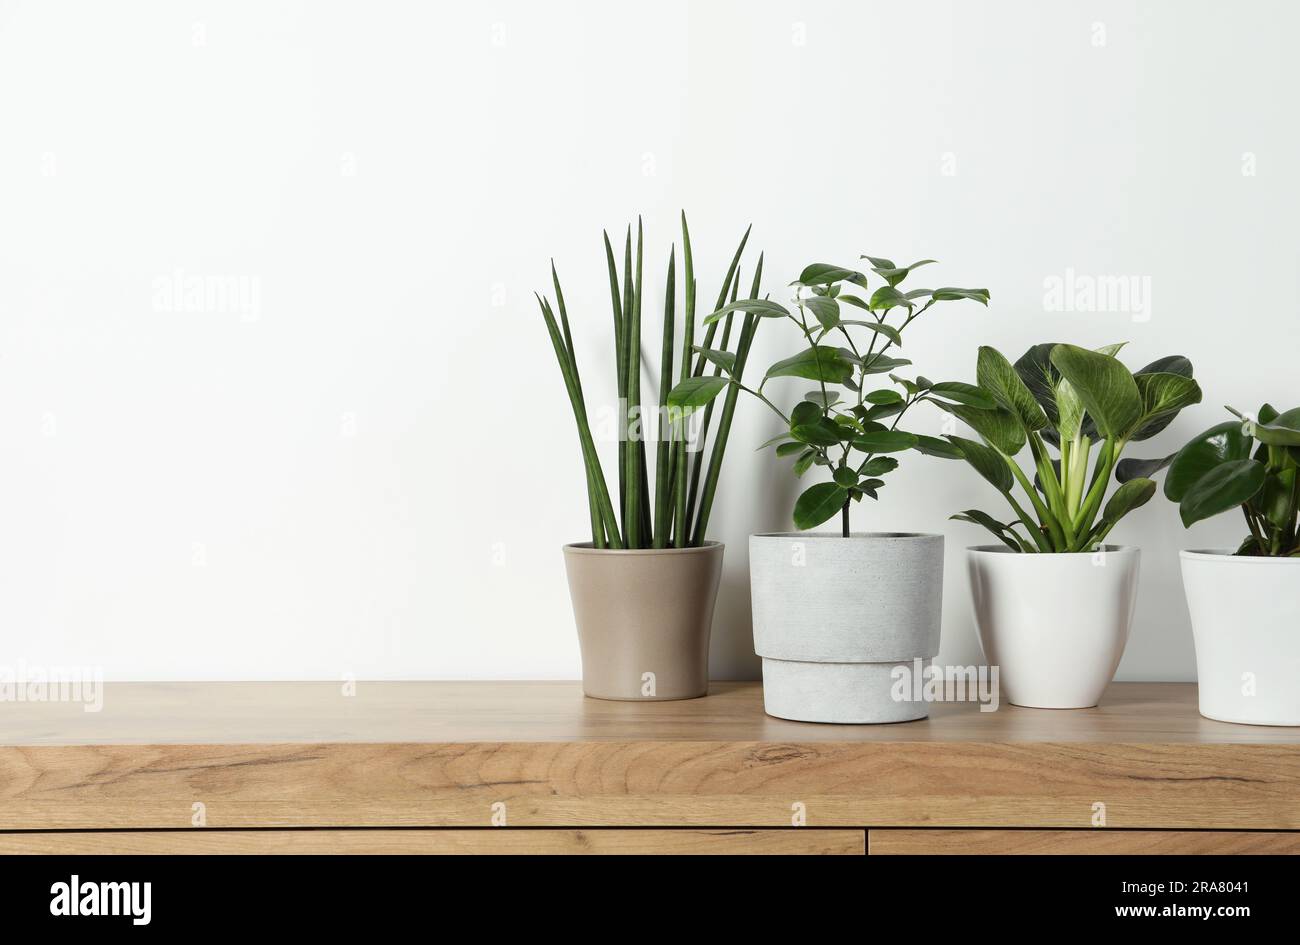 Many different houseplants in pots on wooden table near white wall, space for text Stock Photo